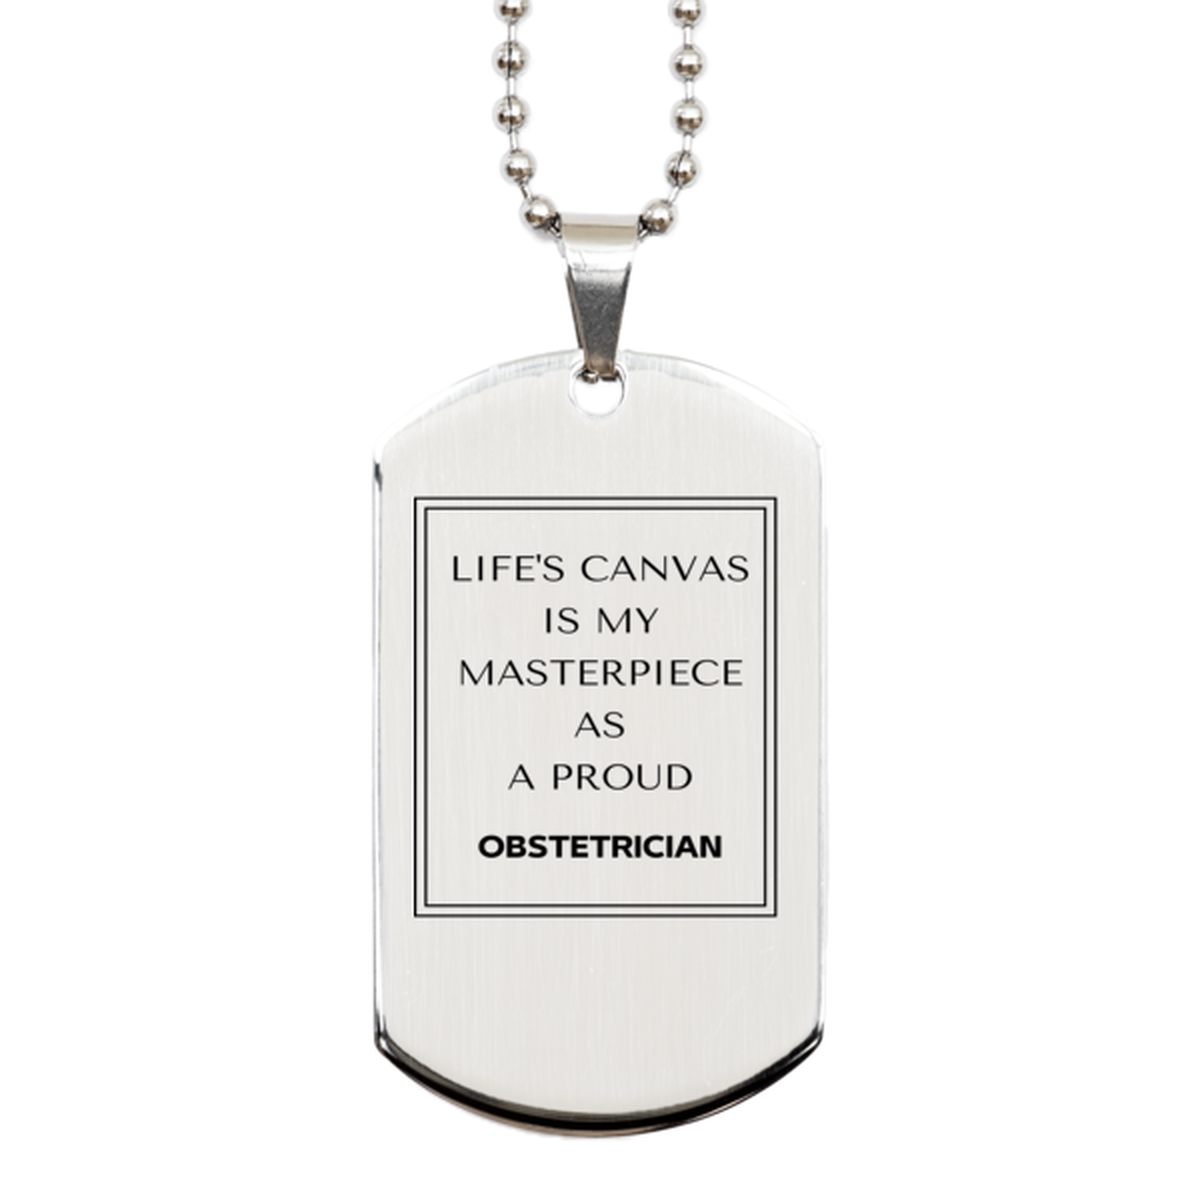 Proud Obstetrician Gifts, Life's canvas is my masterpiece, Epic Birthday Christmas Unique Silver Dog Tag For Obstetrician, Coworkers, Men, Women, Friends